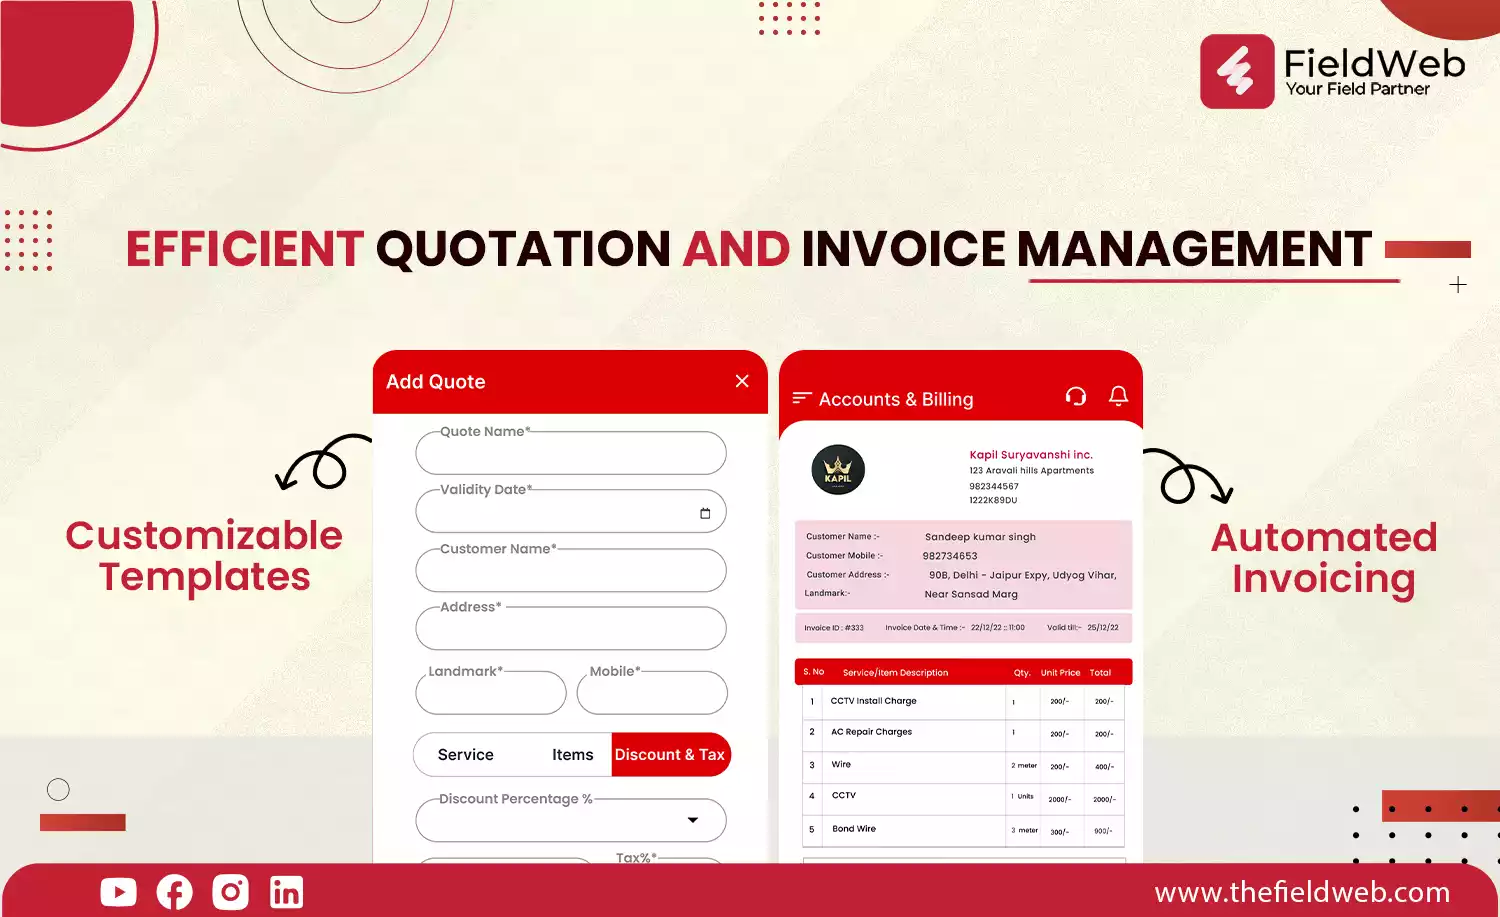 image is displaying Efficient Quotation and Invoice Management Software